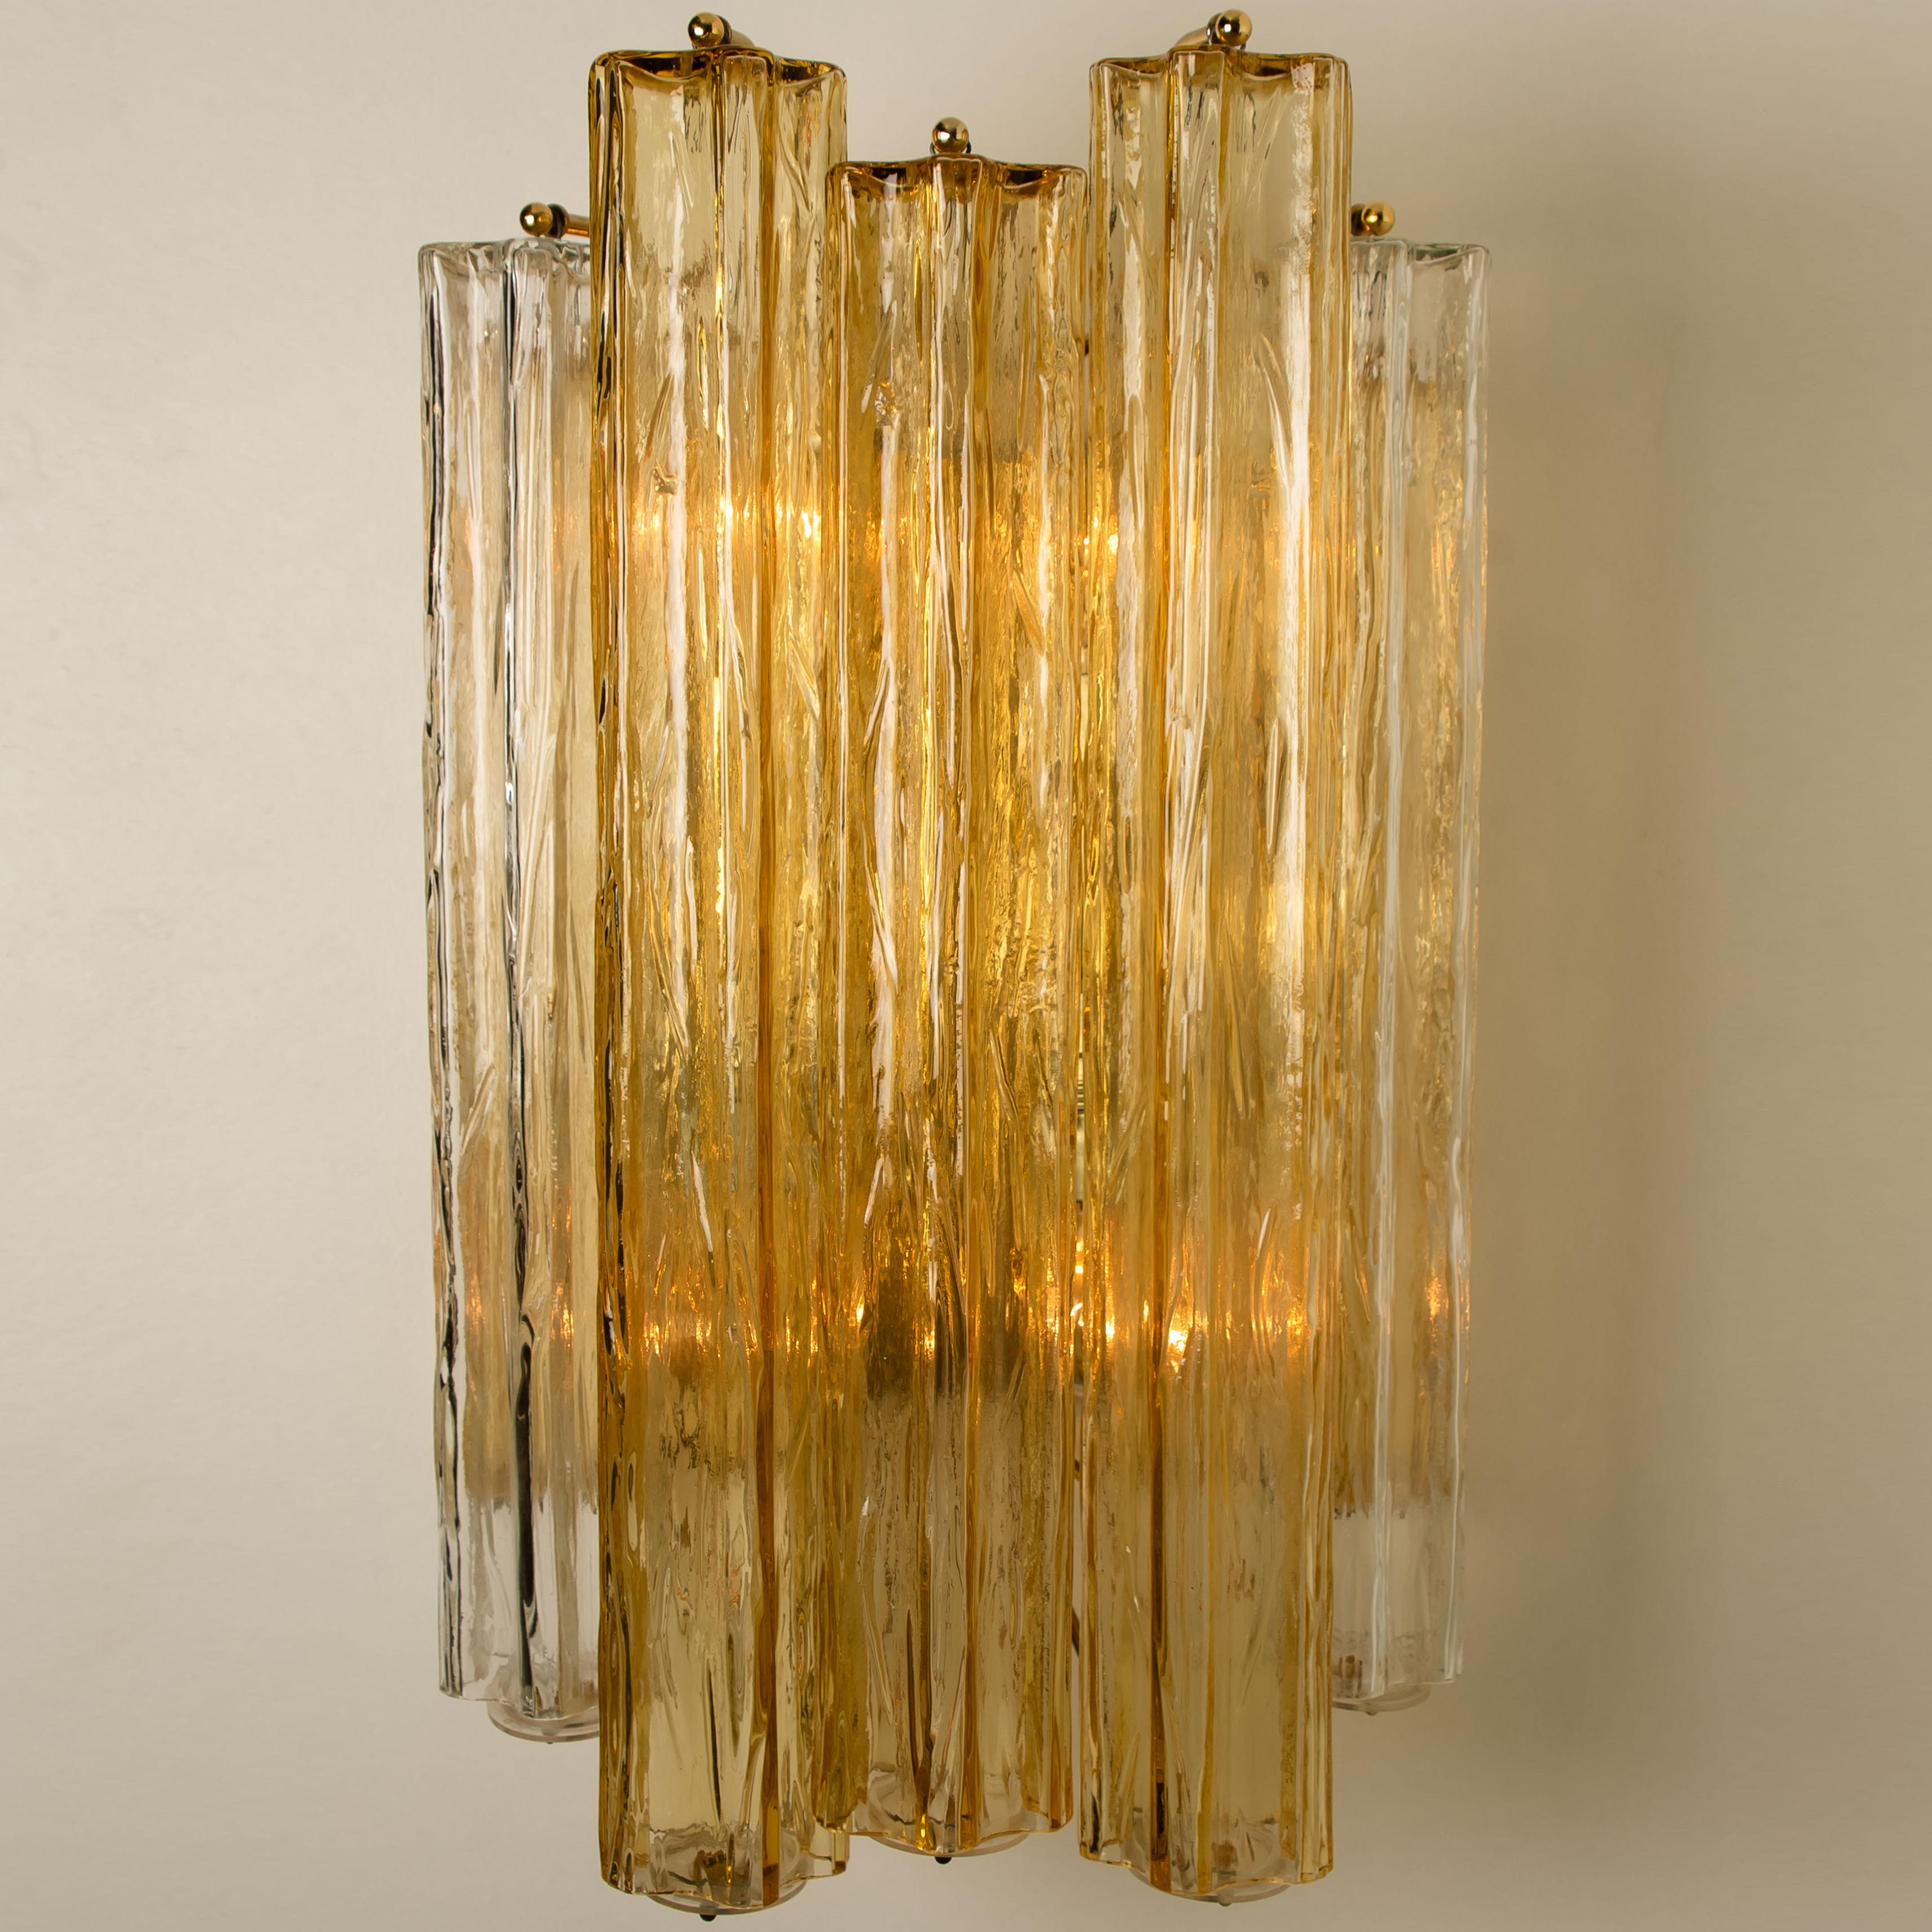 1 of the 2 Extra Large Wall Sconces or Wall Lights Murano Glass, Barovier & Toso 5